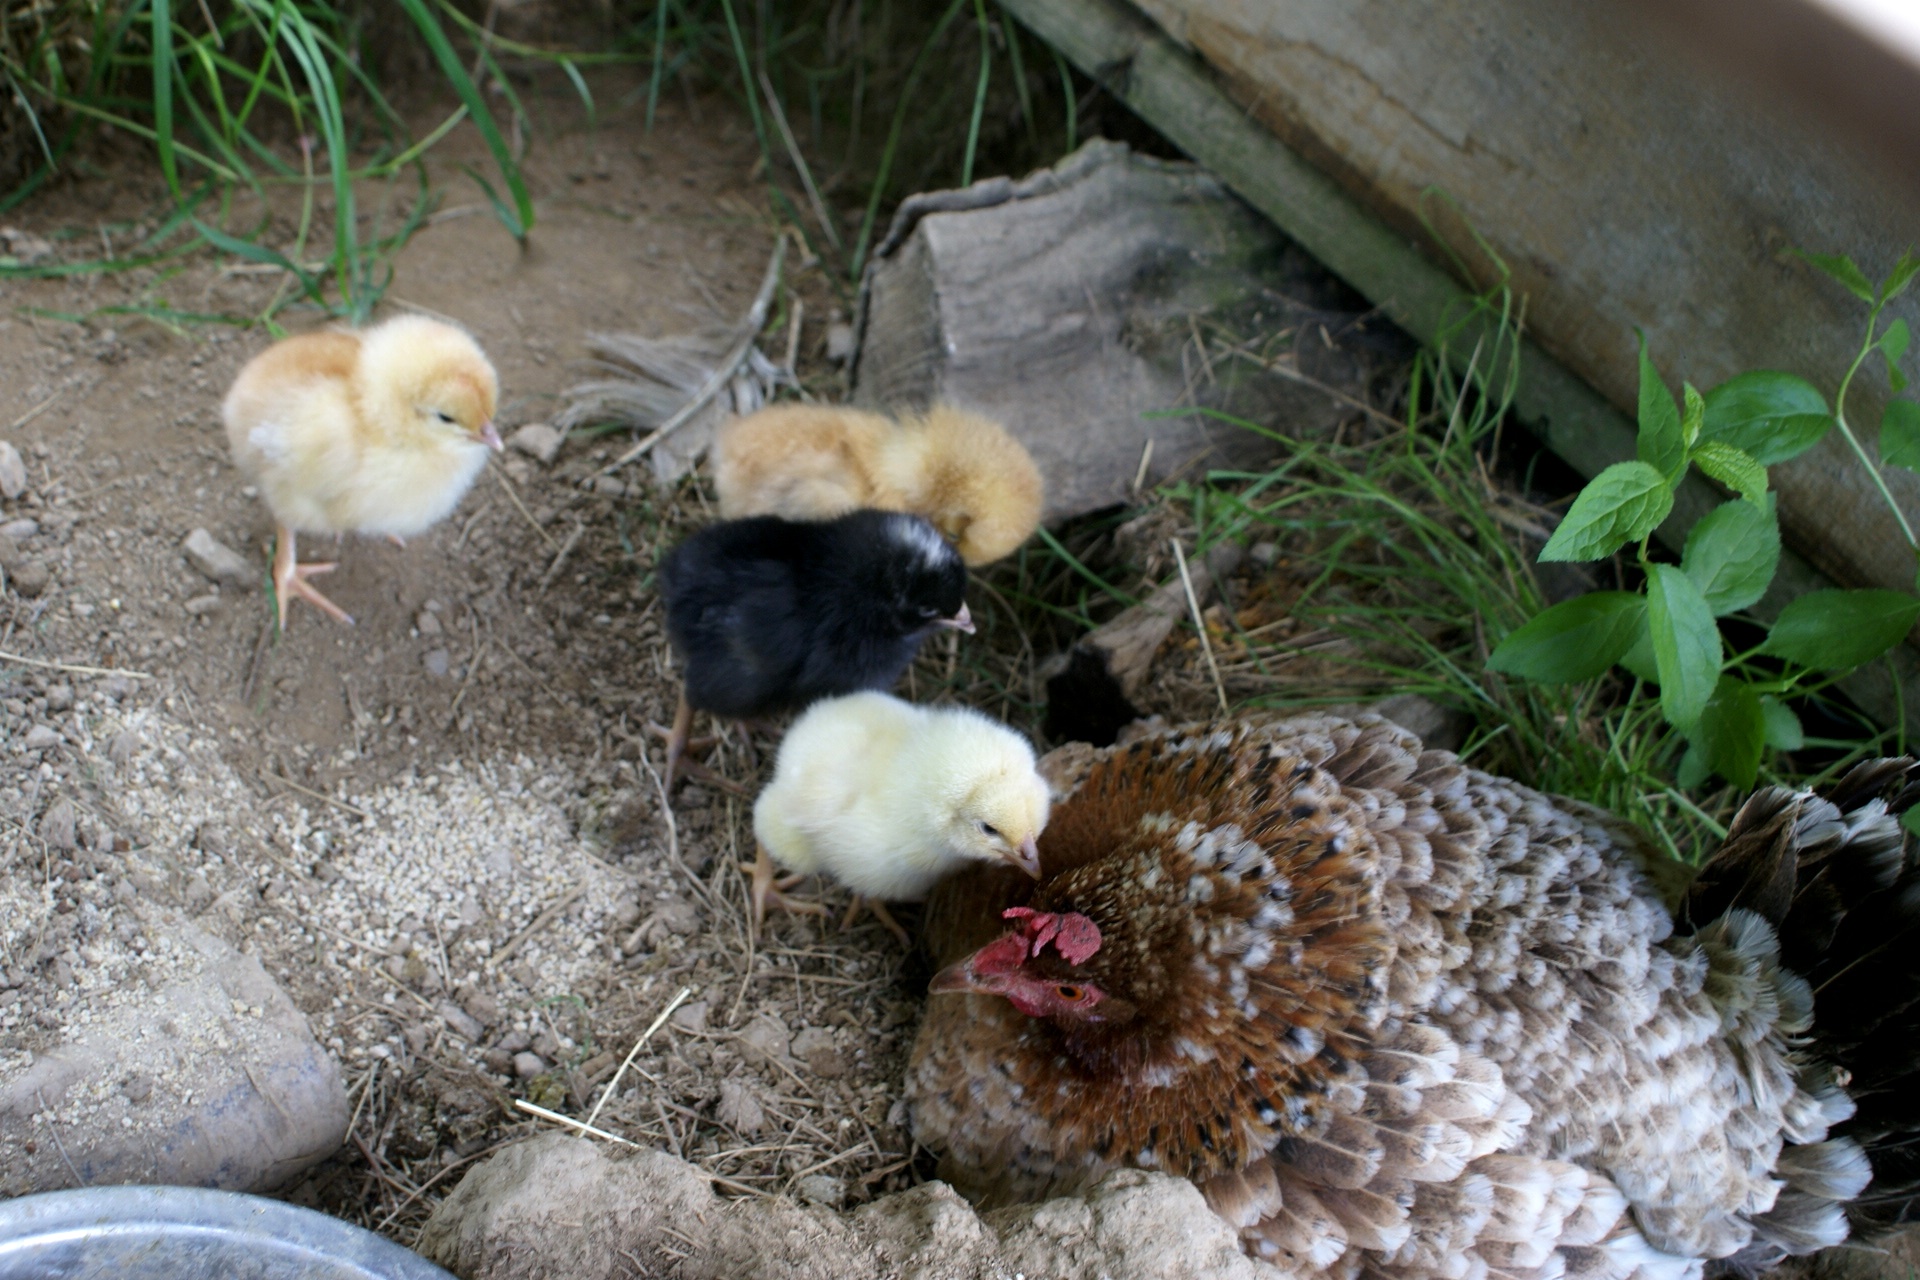 Chicks at Eco-Gites of Lenault, a holiday cottge in Normandy